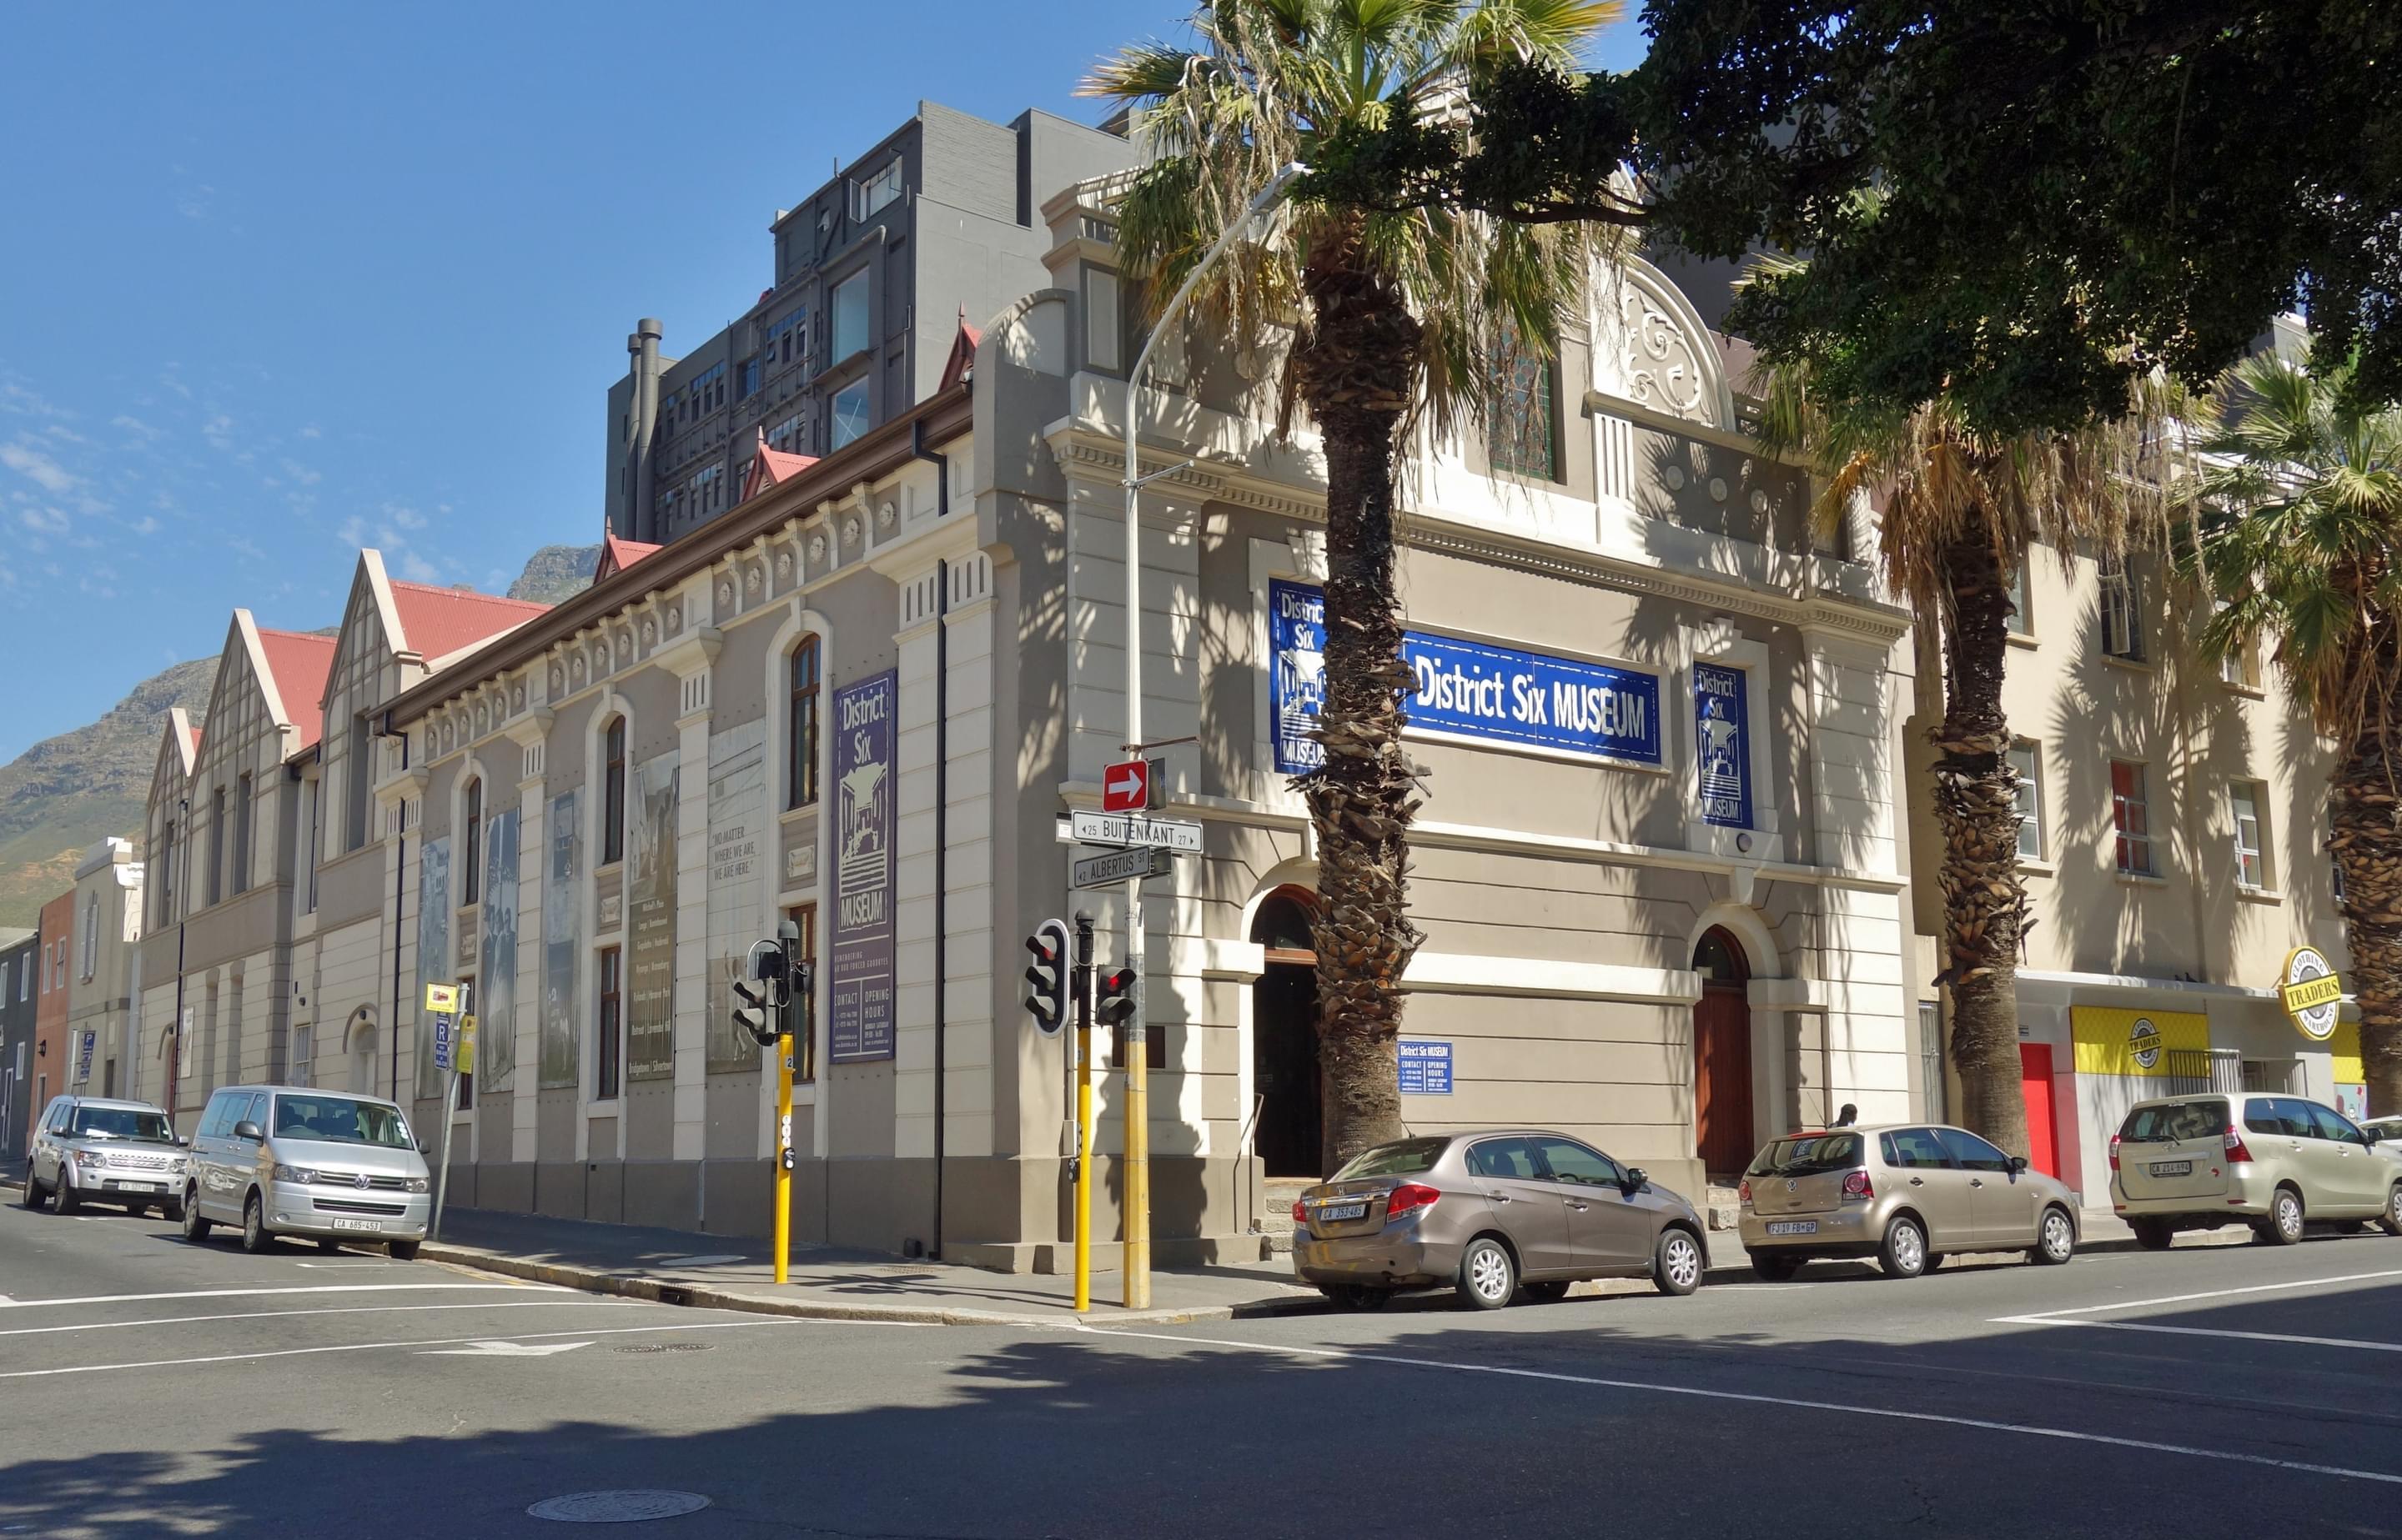 The District Six Museum Overview